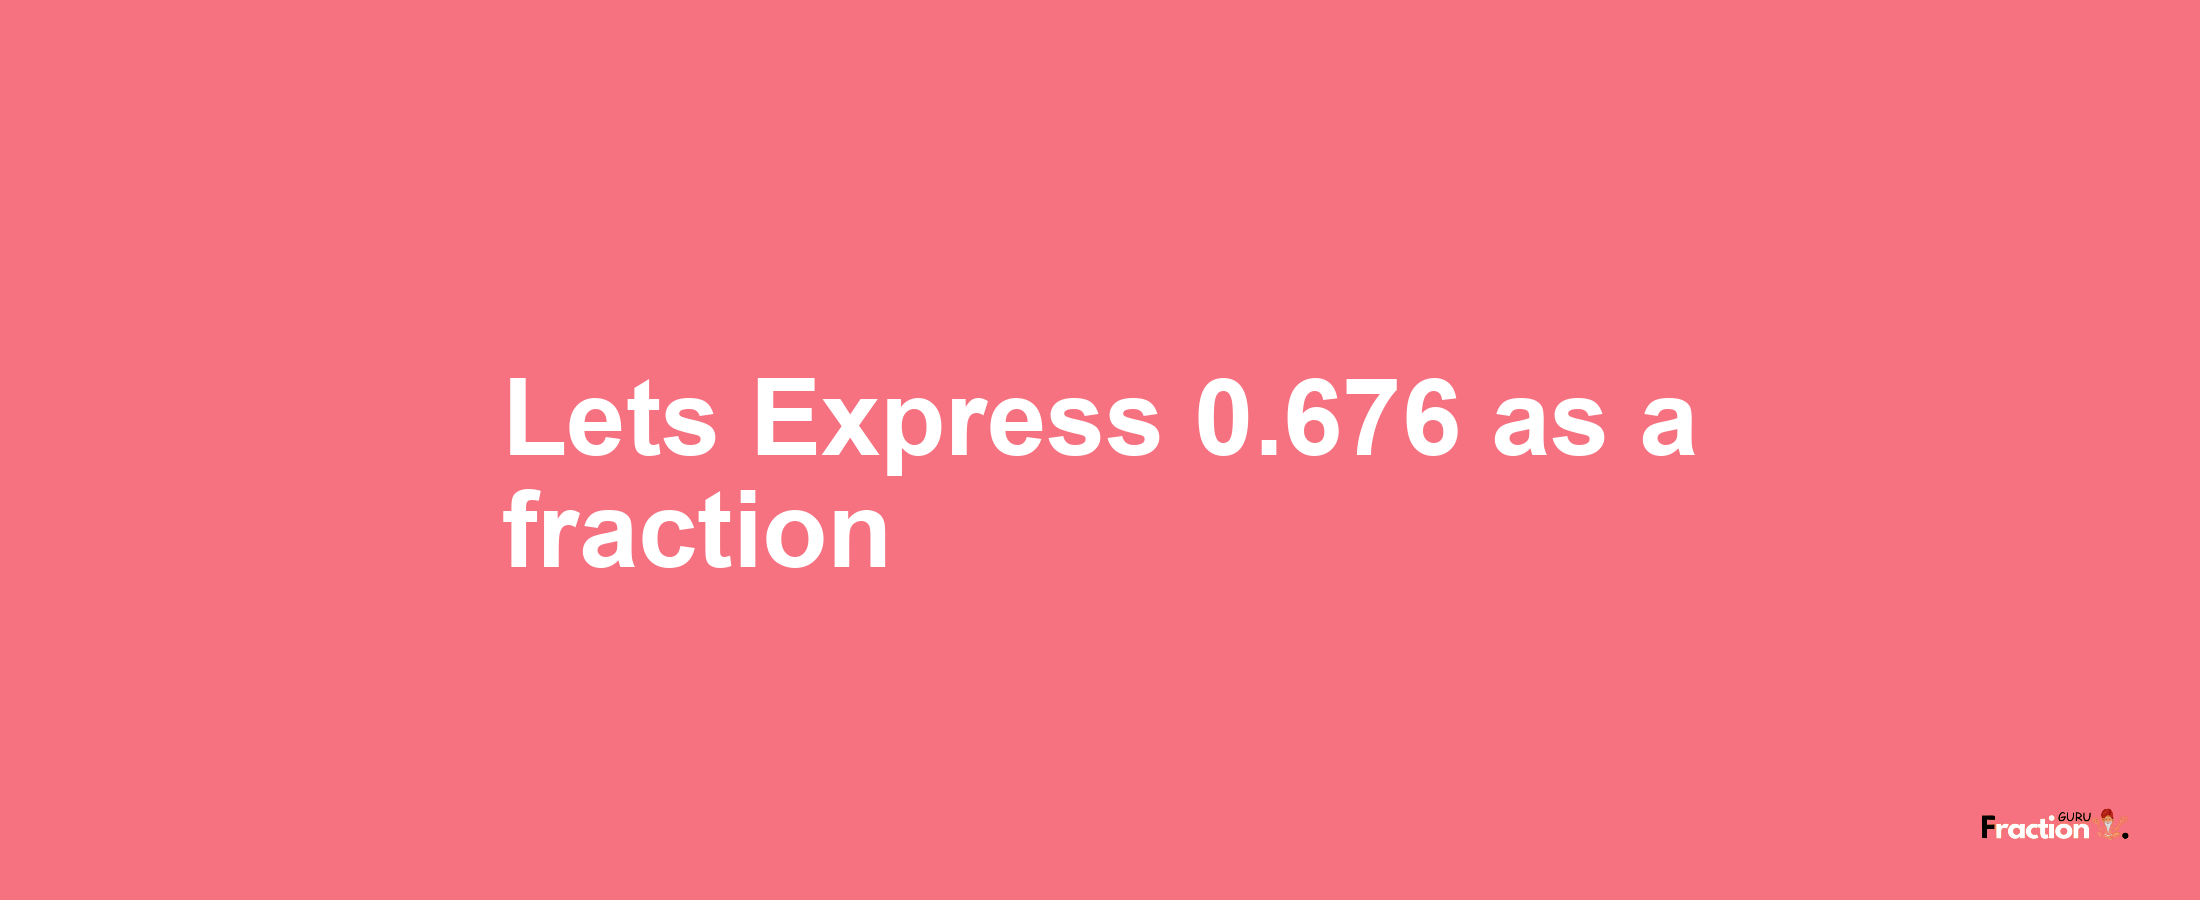 Lets Express 0.676 as afraction